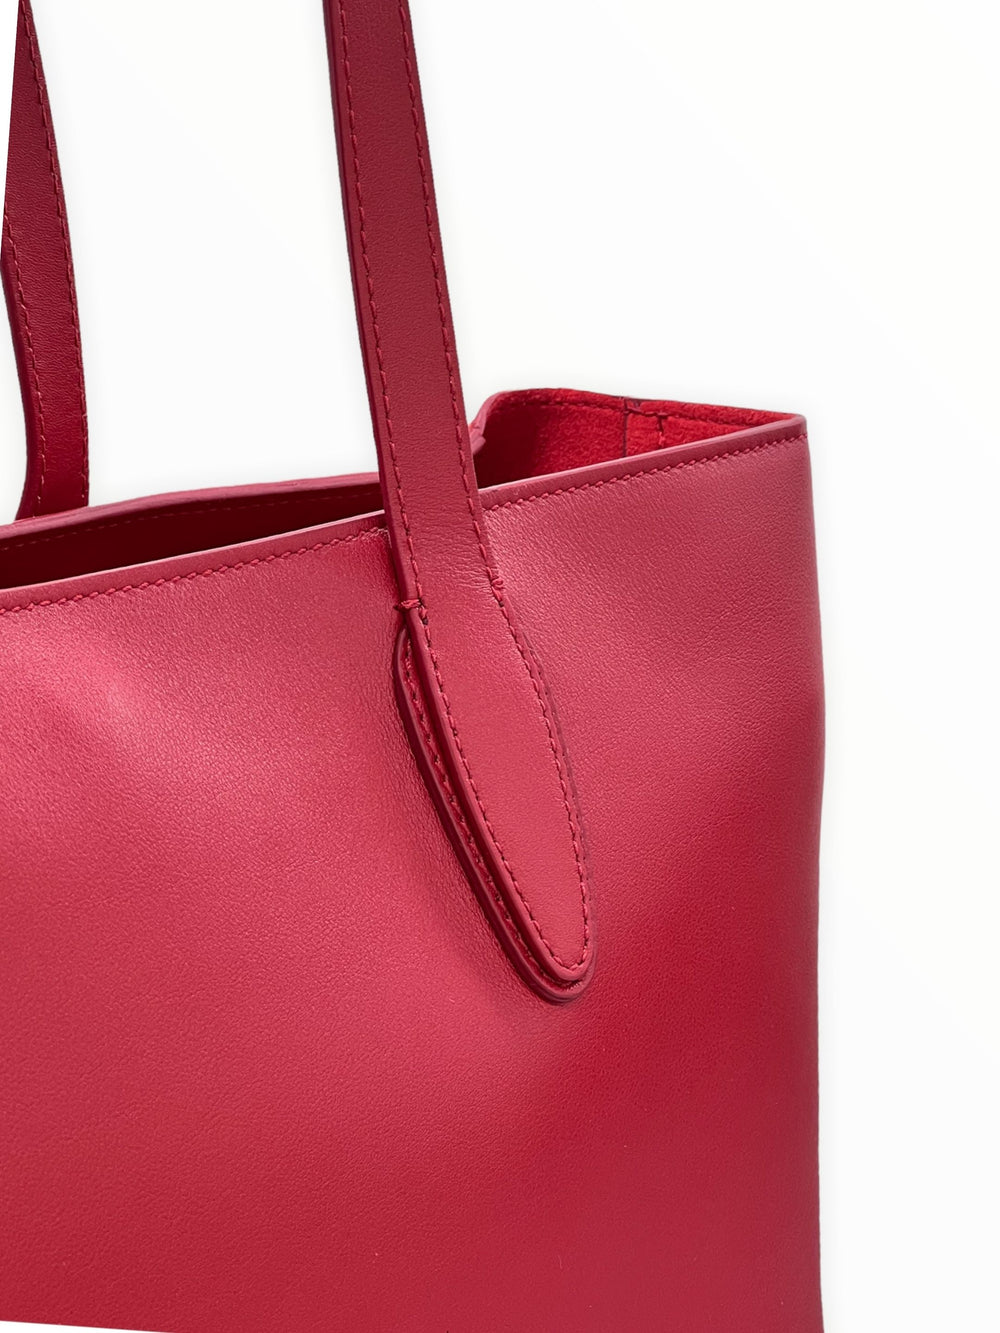 leather women's totes